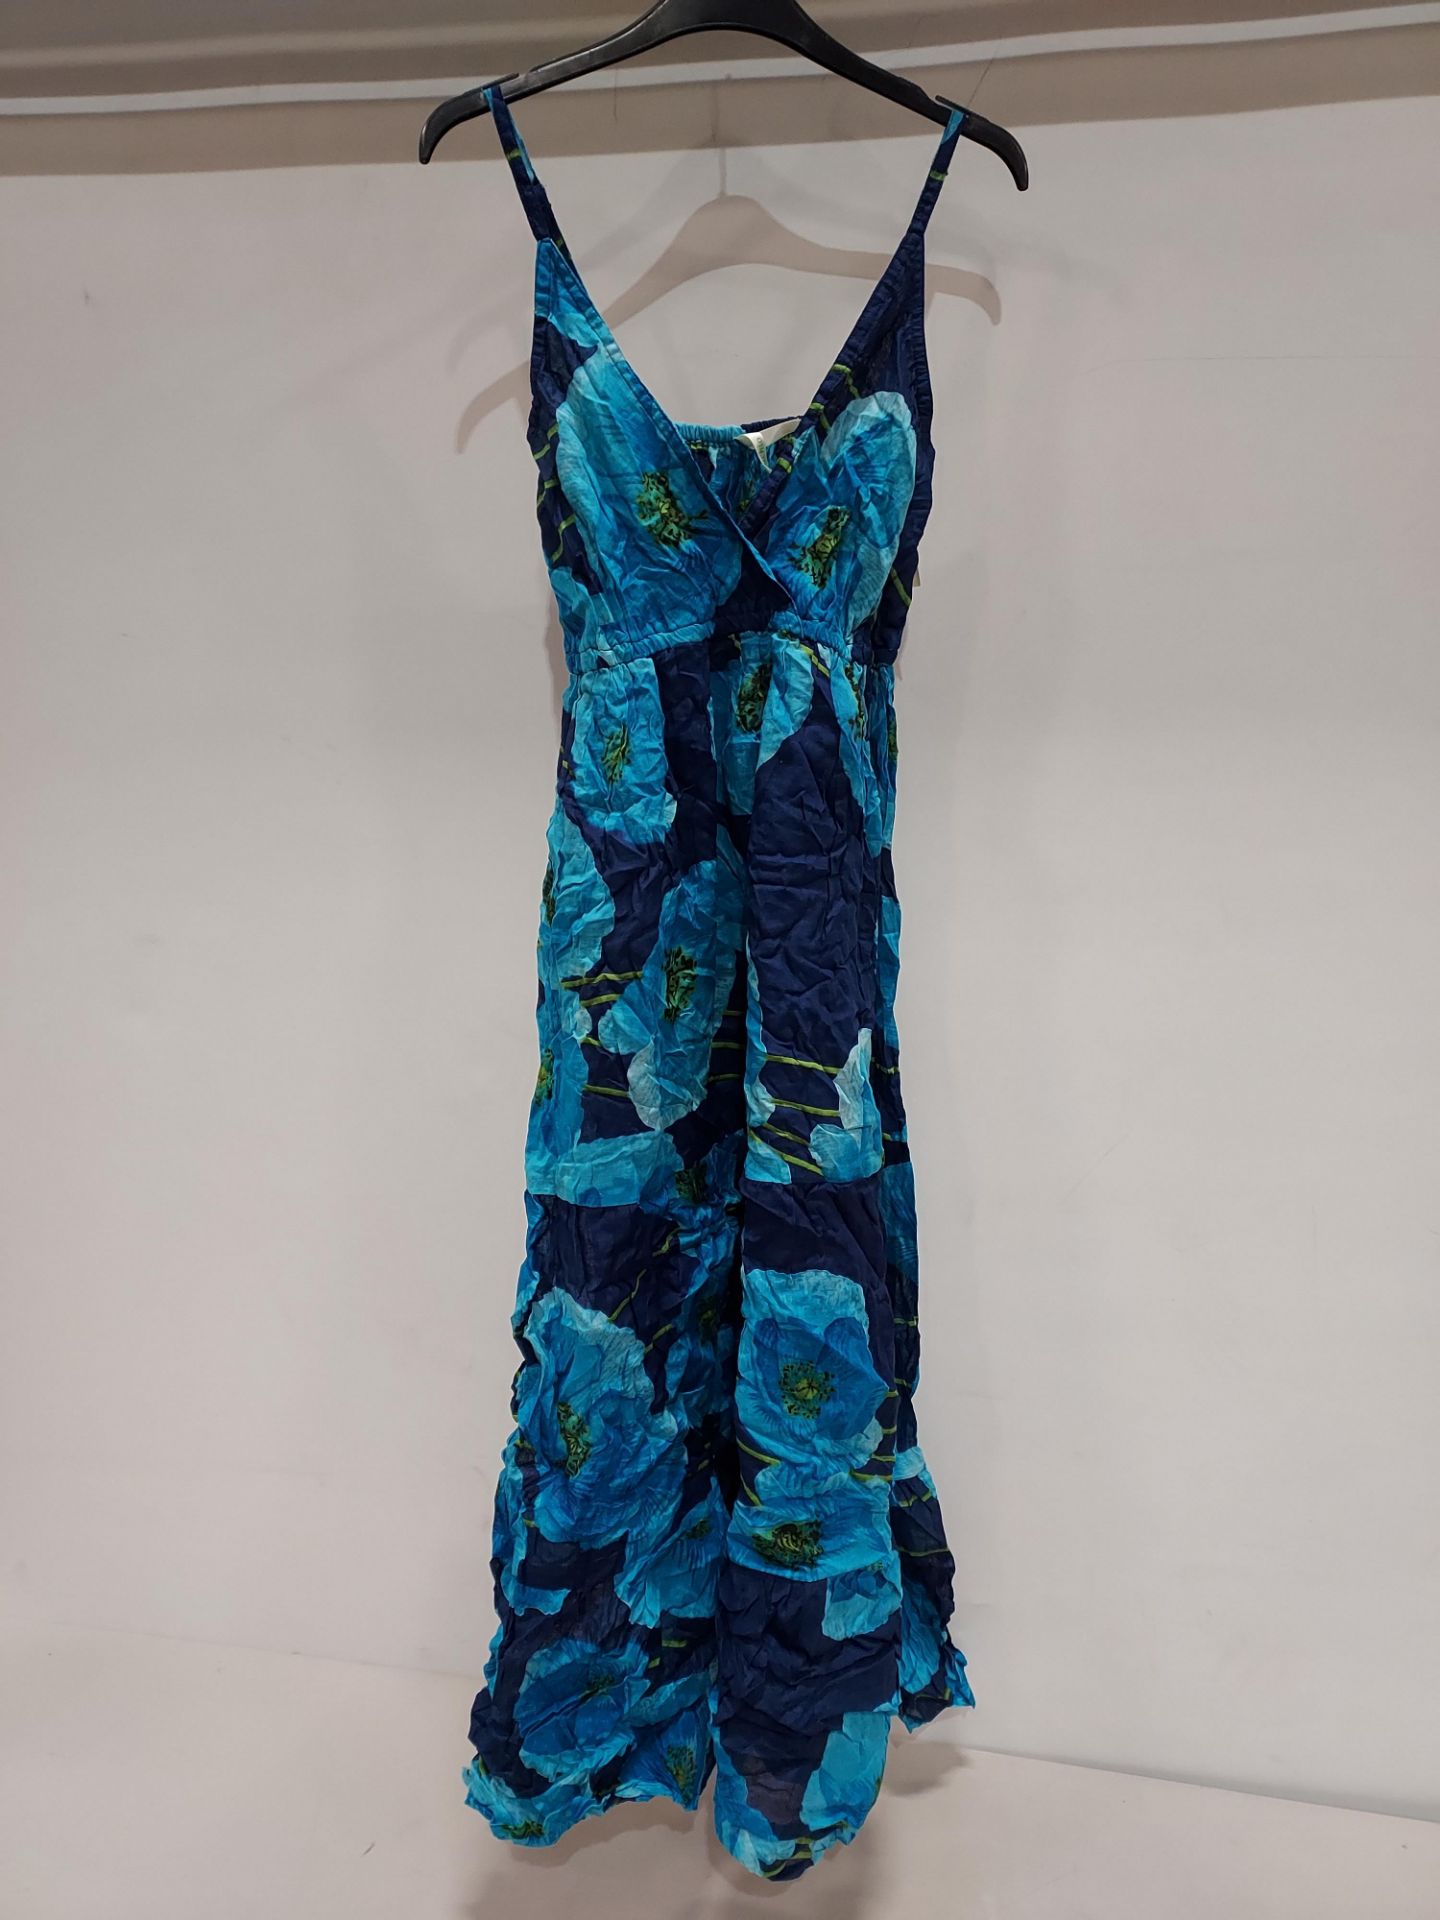 12 X BRAND NEW PISTACHIO SUMMER DRESSES SIZES 5 SMALL , 7 MEDIUM IN BLUE (RRP EACH £25 TOTAL RRP £